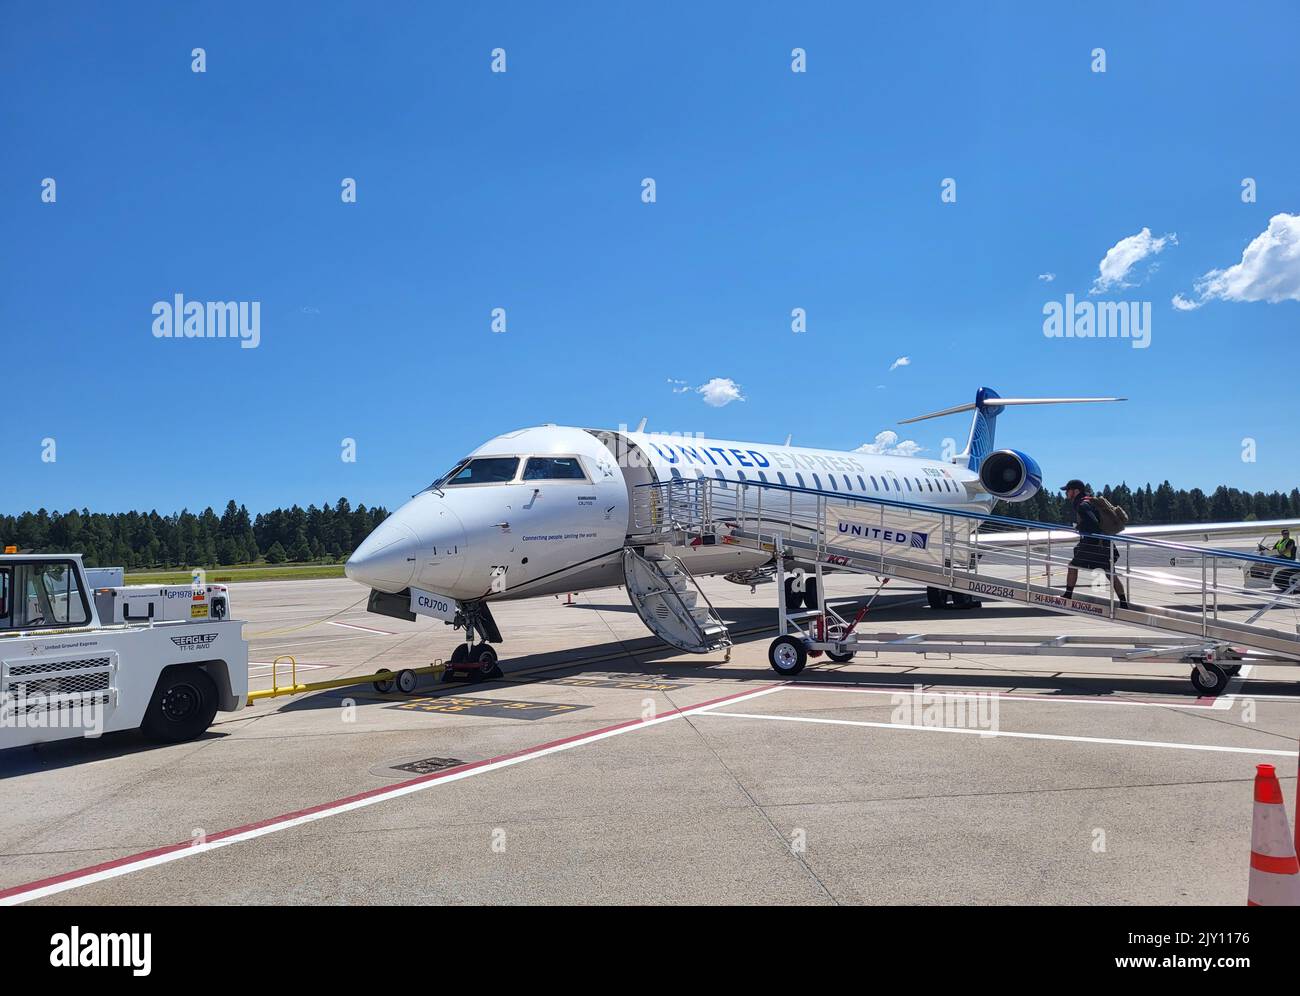 Airplane at Flagstaff airport Stock Photo